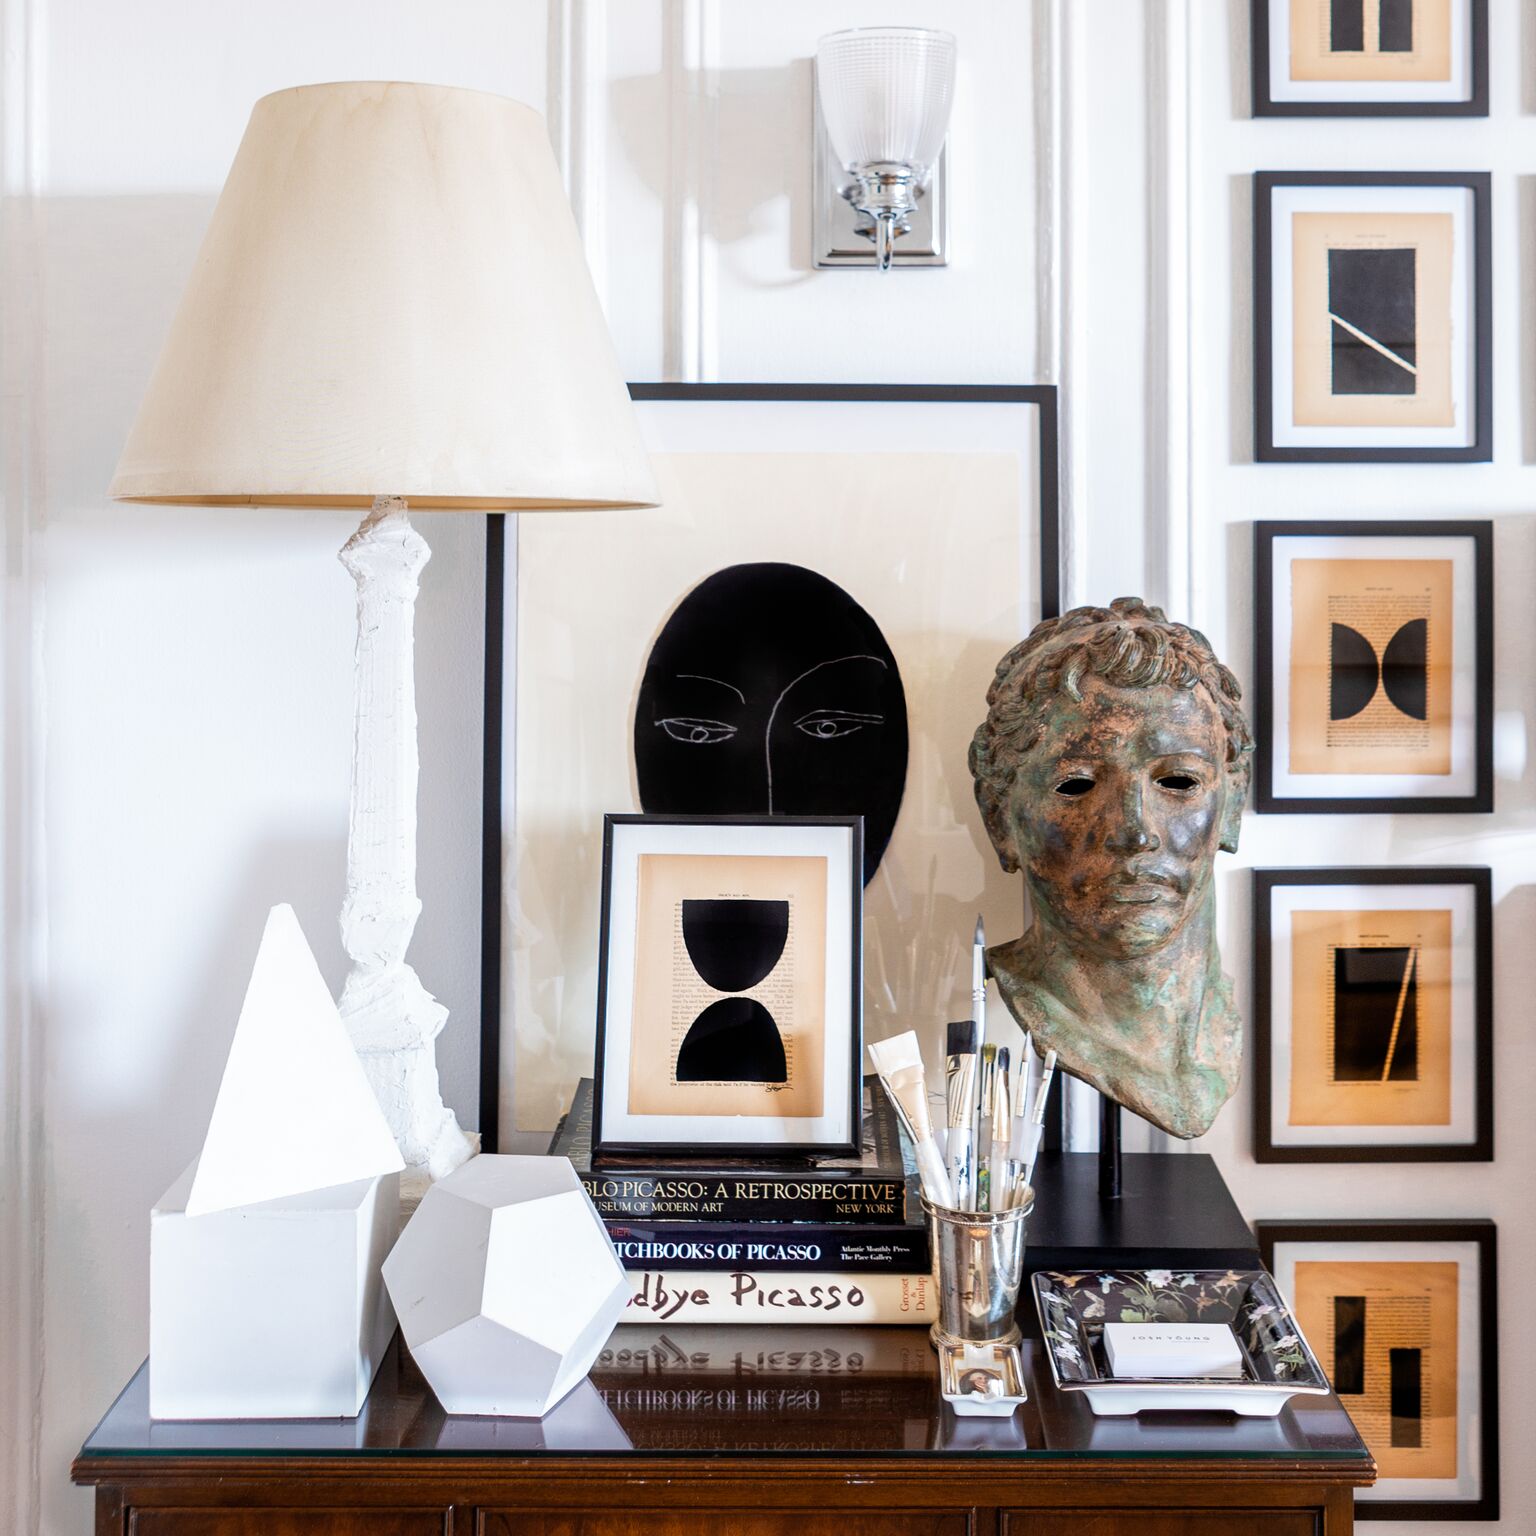 Hidden behind and beneath geometric curios, a hand-plastered lamp, a classical bust, paintbrushes, and his own art is Young’s much-cherished mini library dedicated to Picasso. “It’s a cliché, but I became absolutely obsessed with Picasso in high sch…